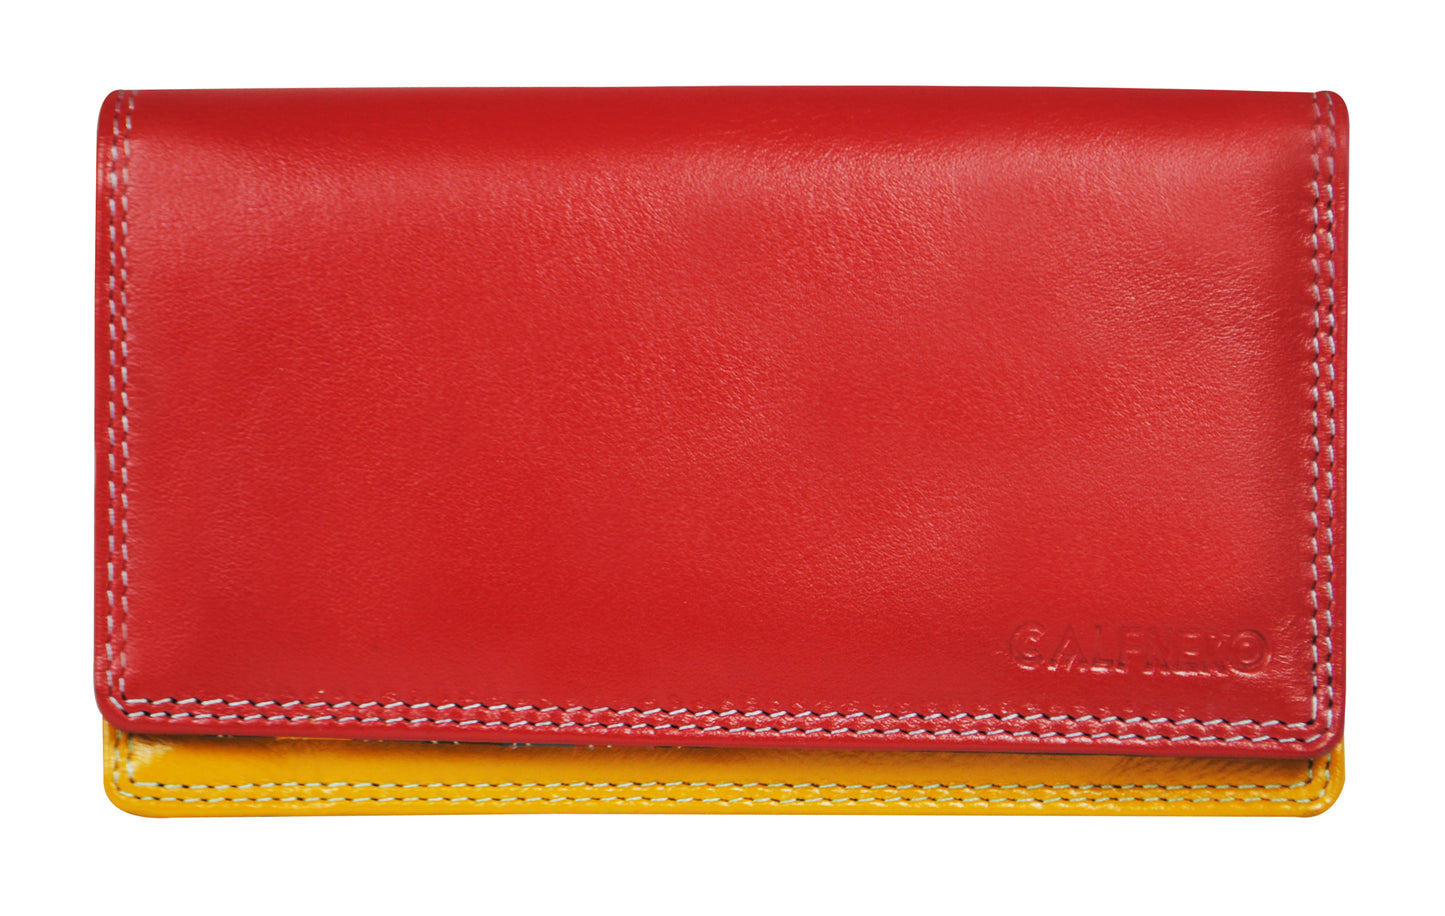 Calfnero Genuine Leather Women's Wallet (6083-Red-Lime)